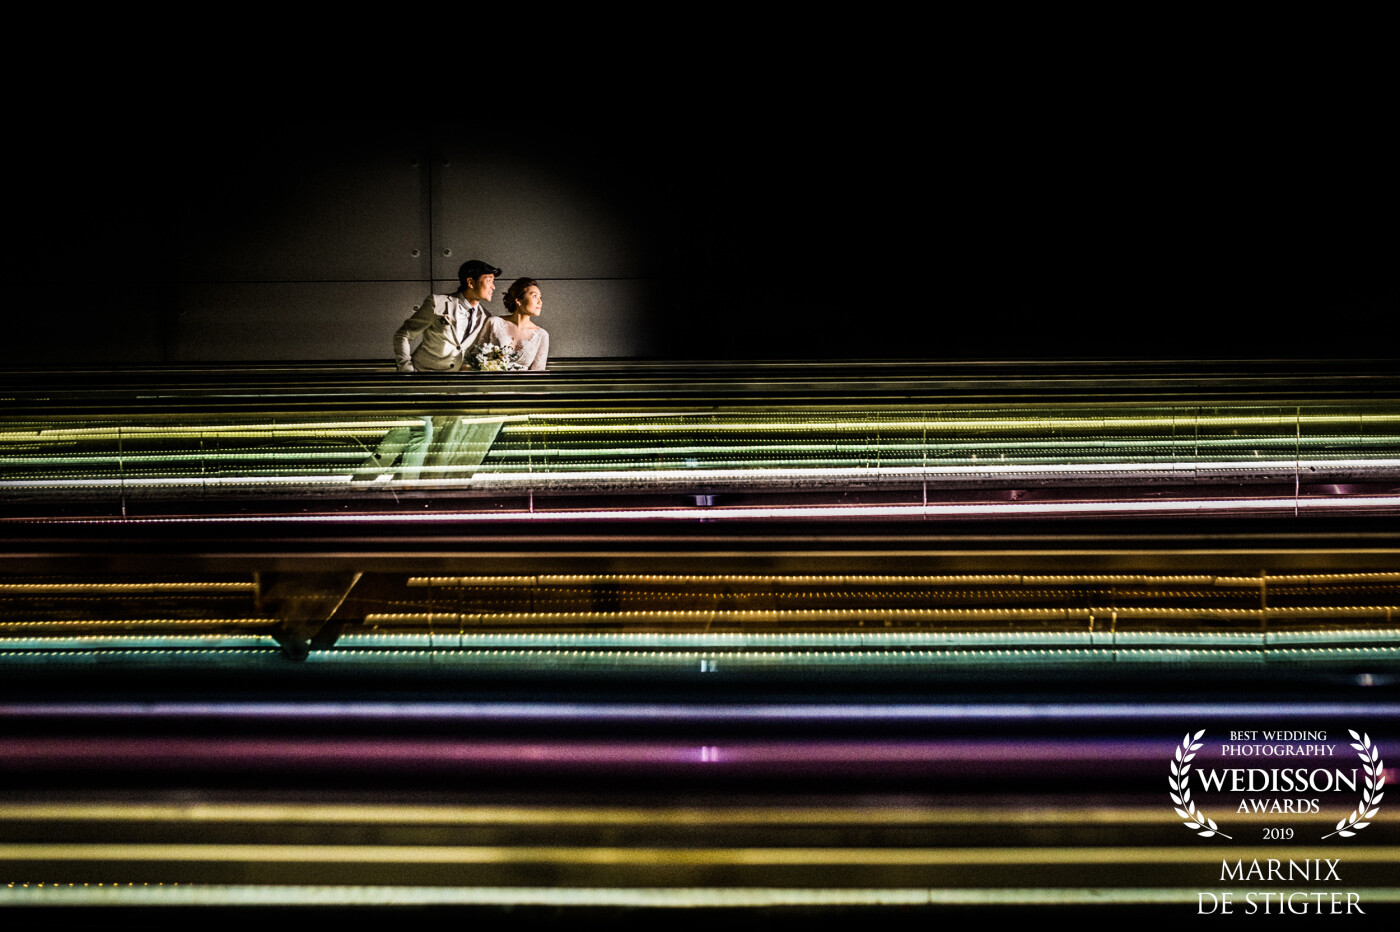 During this pre-wedding shoot, we came along this long escalator with funky colors. As they went up and I went down we had to time exactly when would be the best moment. Using flash they got isolated from the surrounds which adds an extra pop to the image! :)